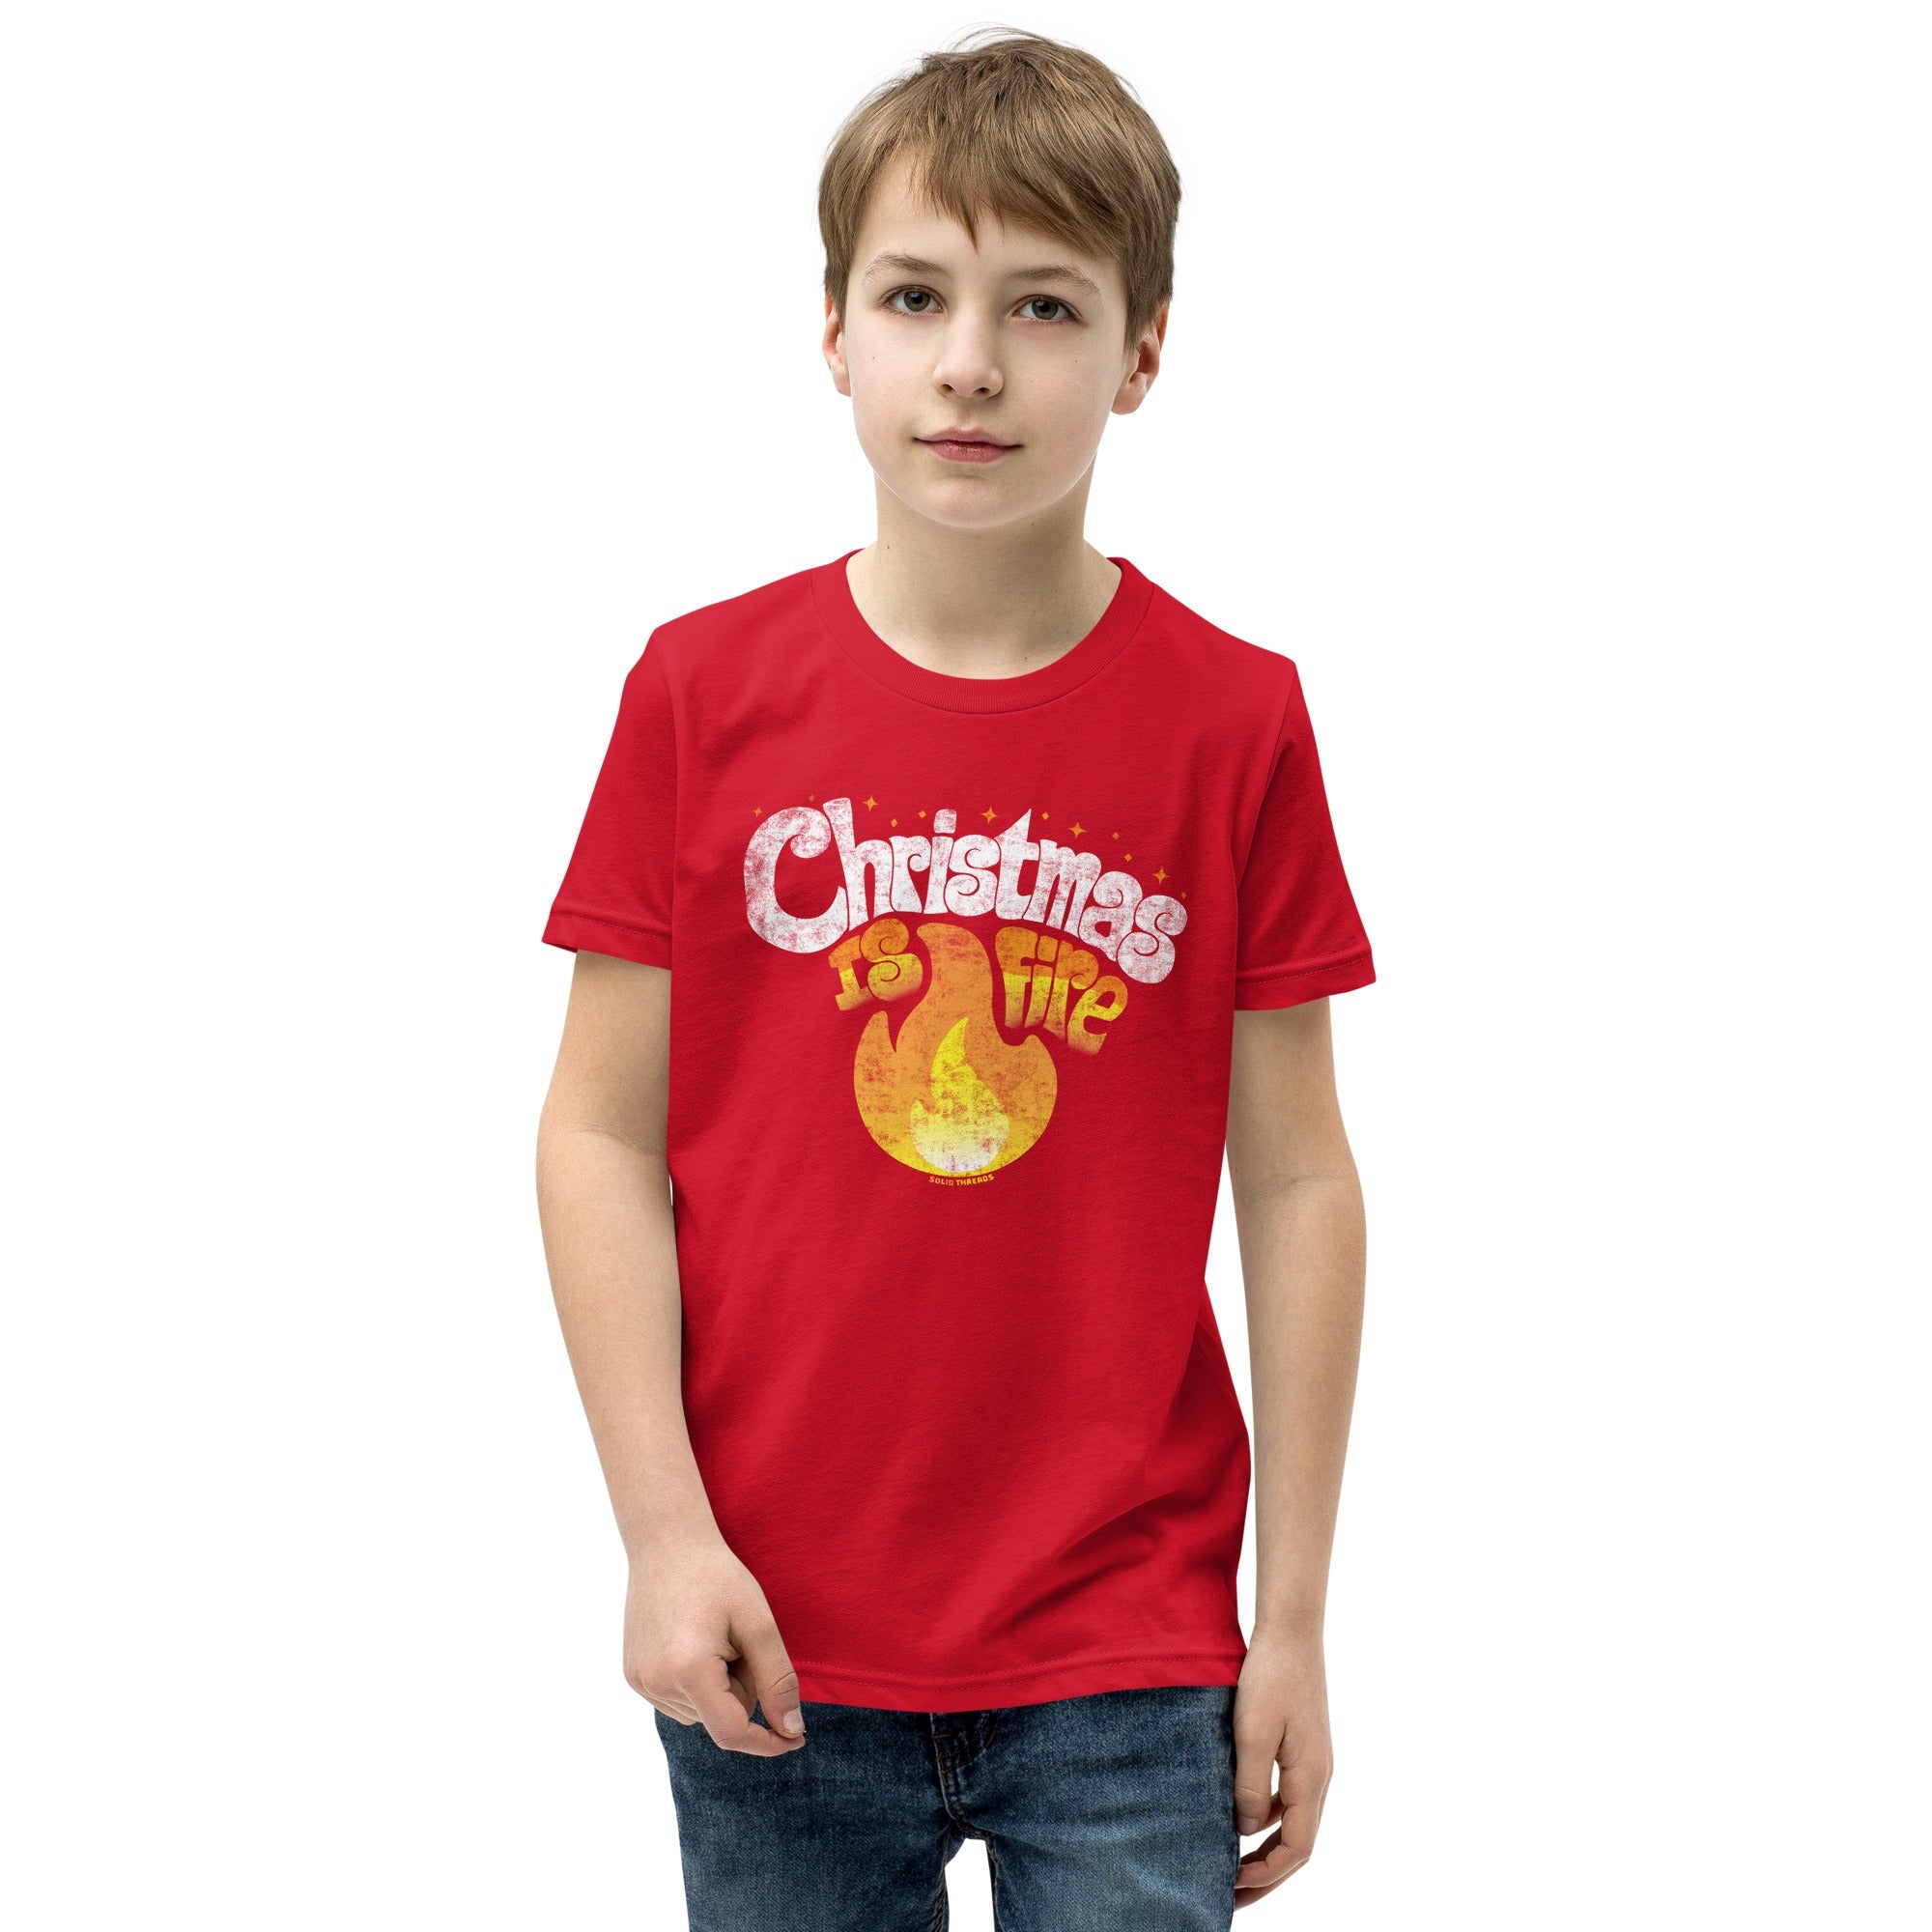 Youth Christmas Is Fire Retro Extra Soft T-Shirt | Funny Holiday Kids Tee | Solid Threads